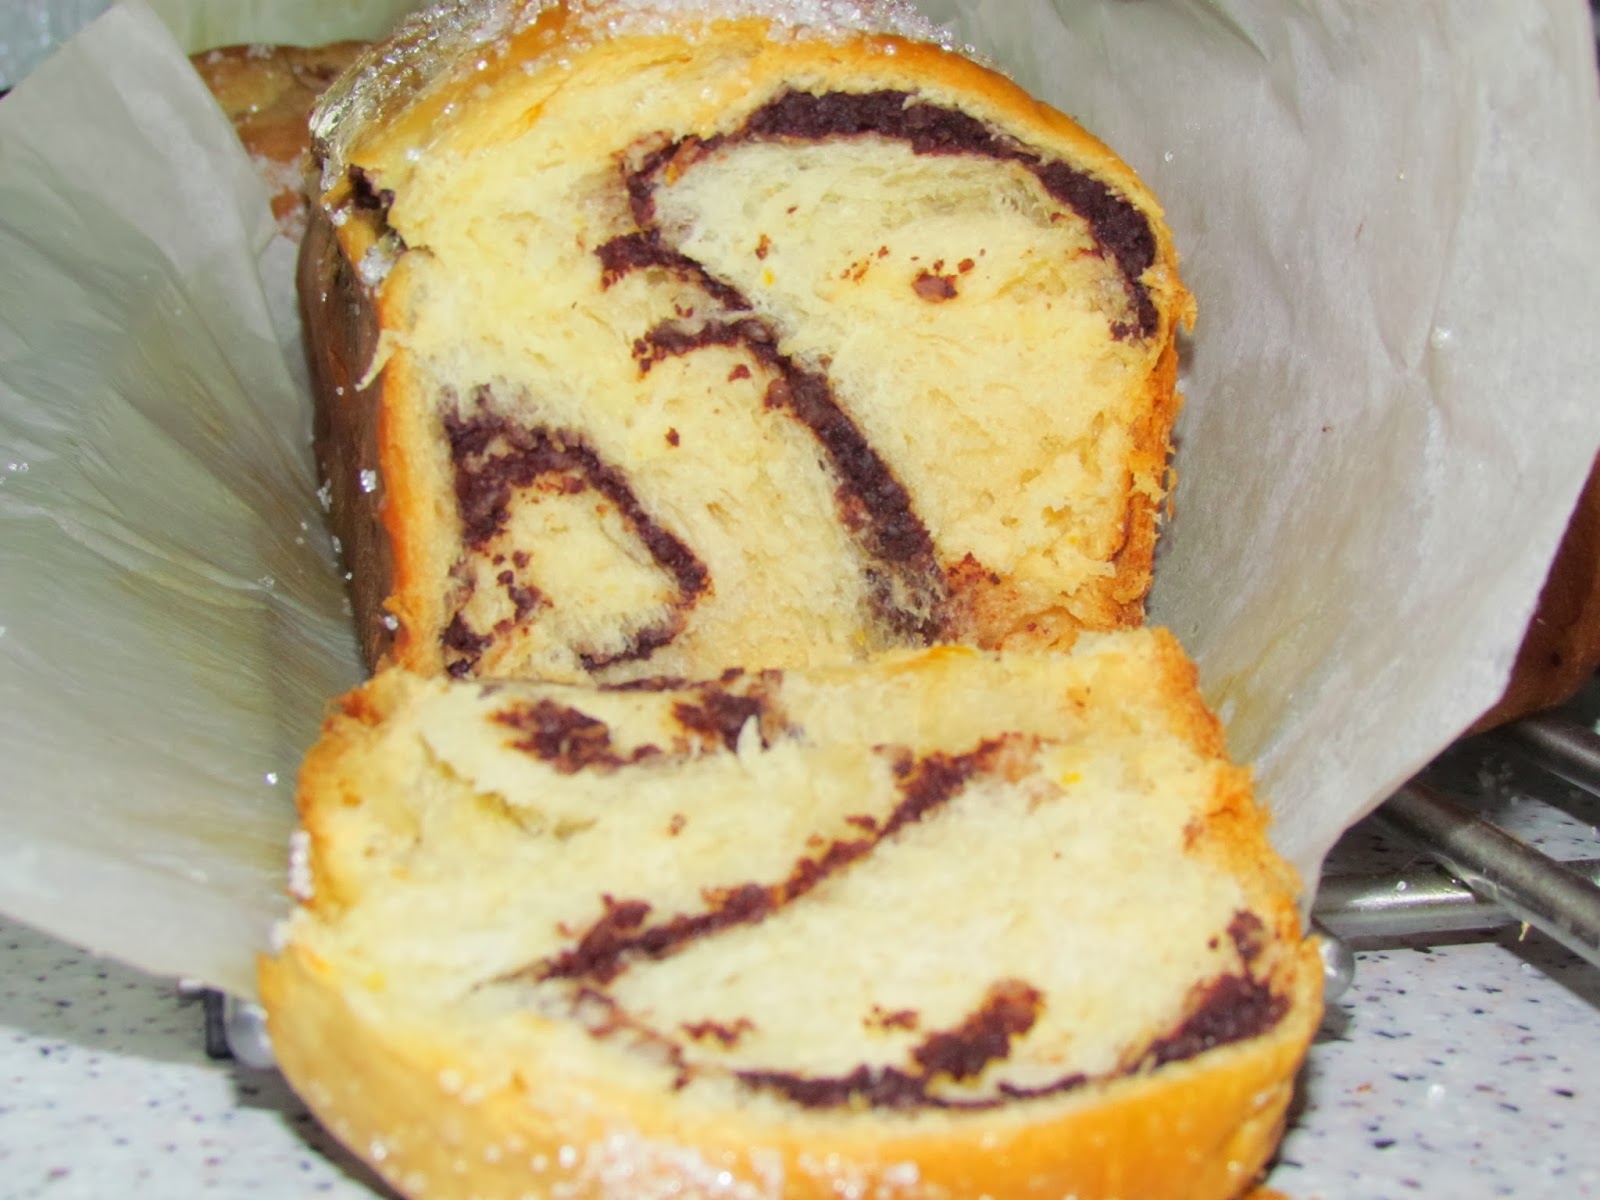 Cozonac cu nuca si cacao / Panettone with nuts and cocoa